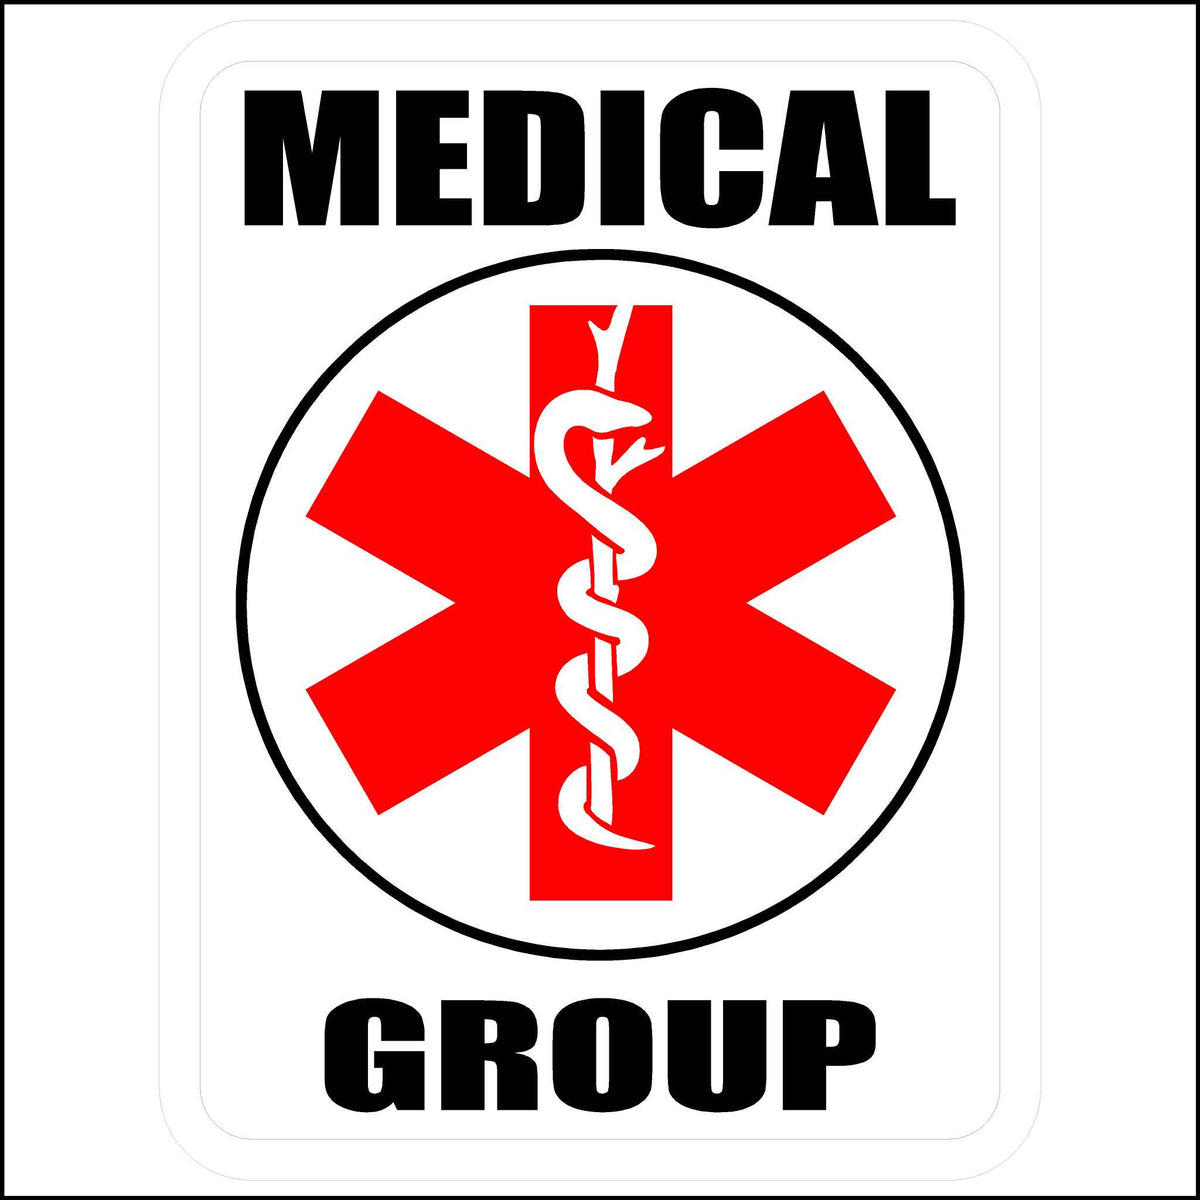 Red, White, and Black In Color Medical Group Sticker.